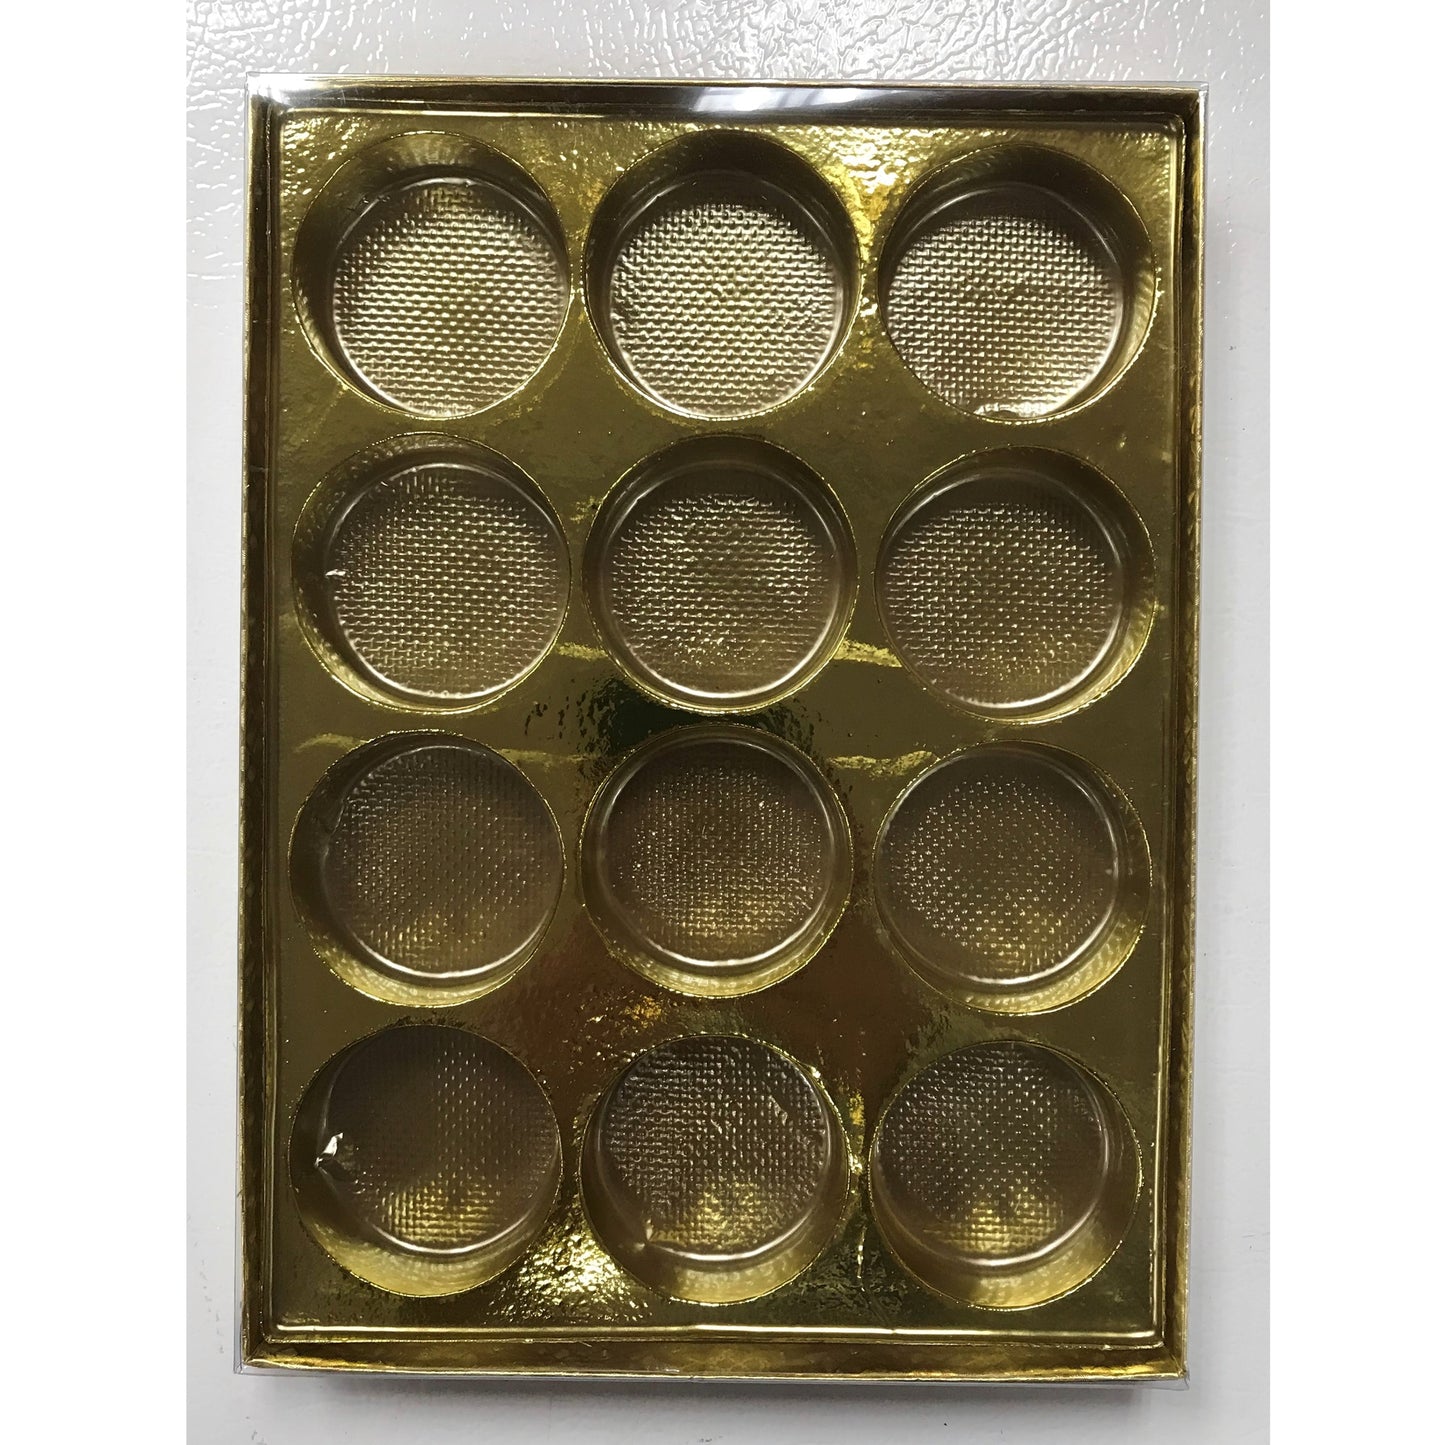 The photo shows a gold candy box insert with twelve round, textured cavities for holding individual chocolates or truffles.